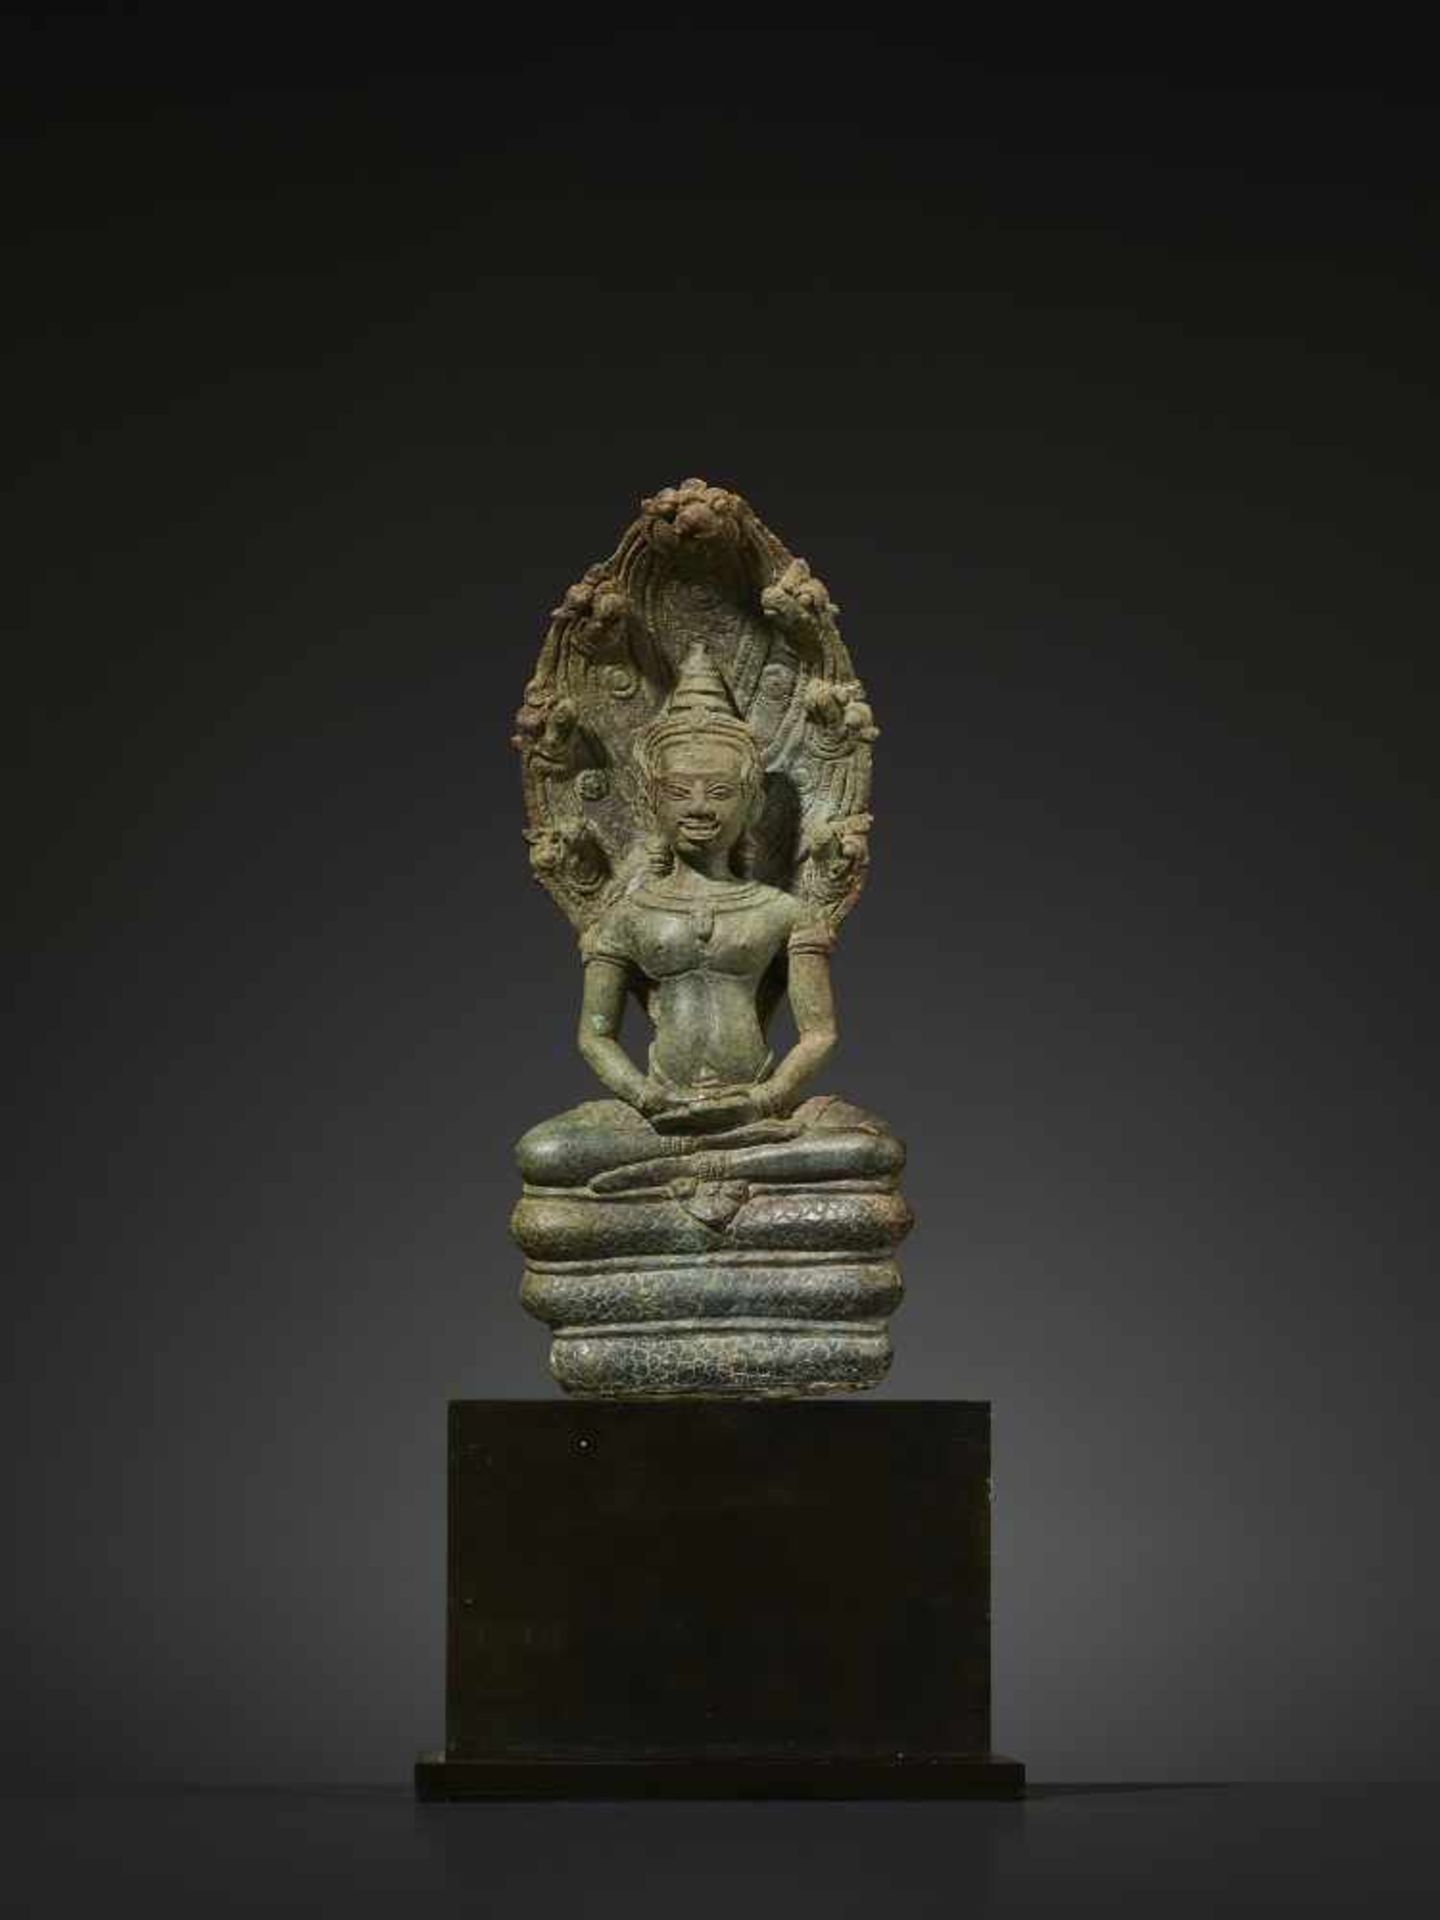 A KHMER BRONZE BUDDHA MUCHALINDA Cambodia, Angkor period, 12th century. Finely cast and incised